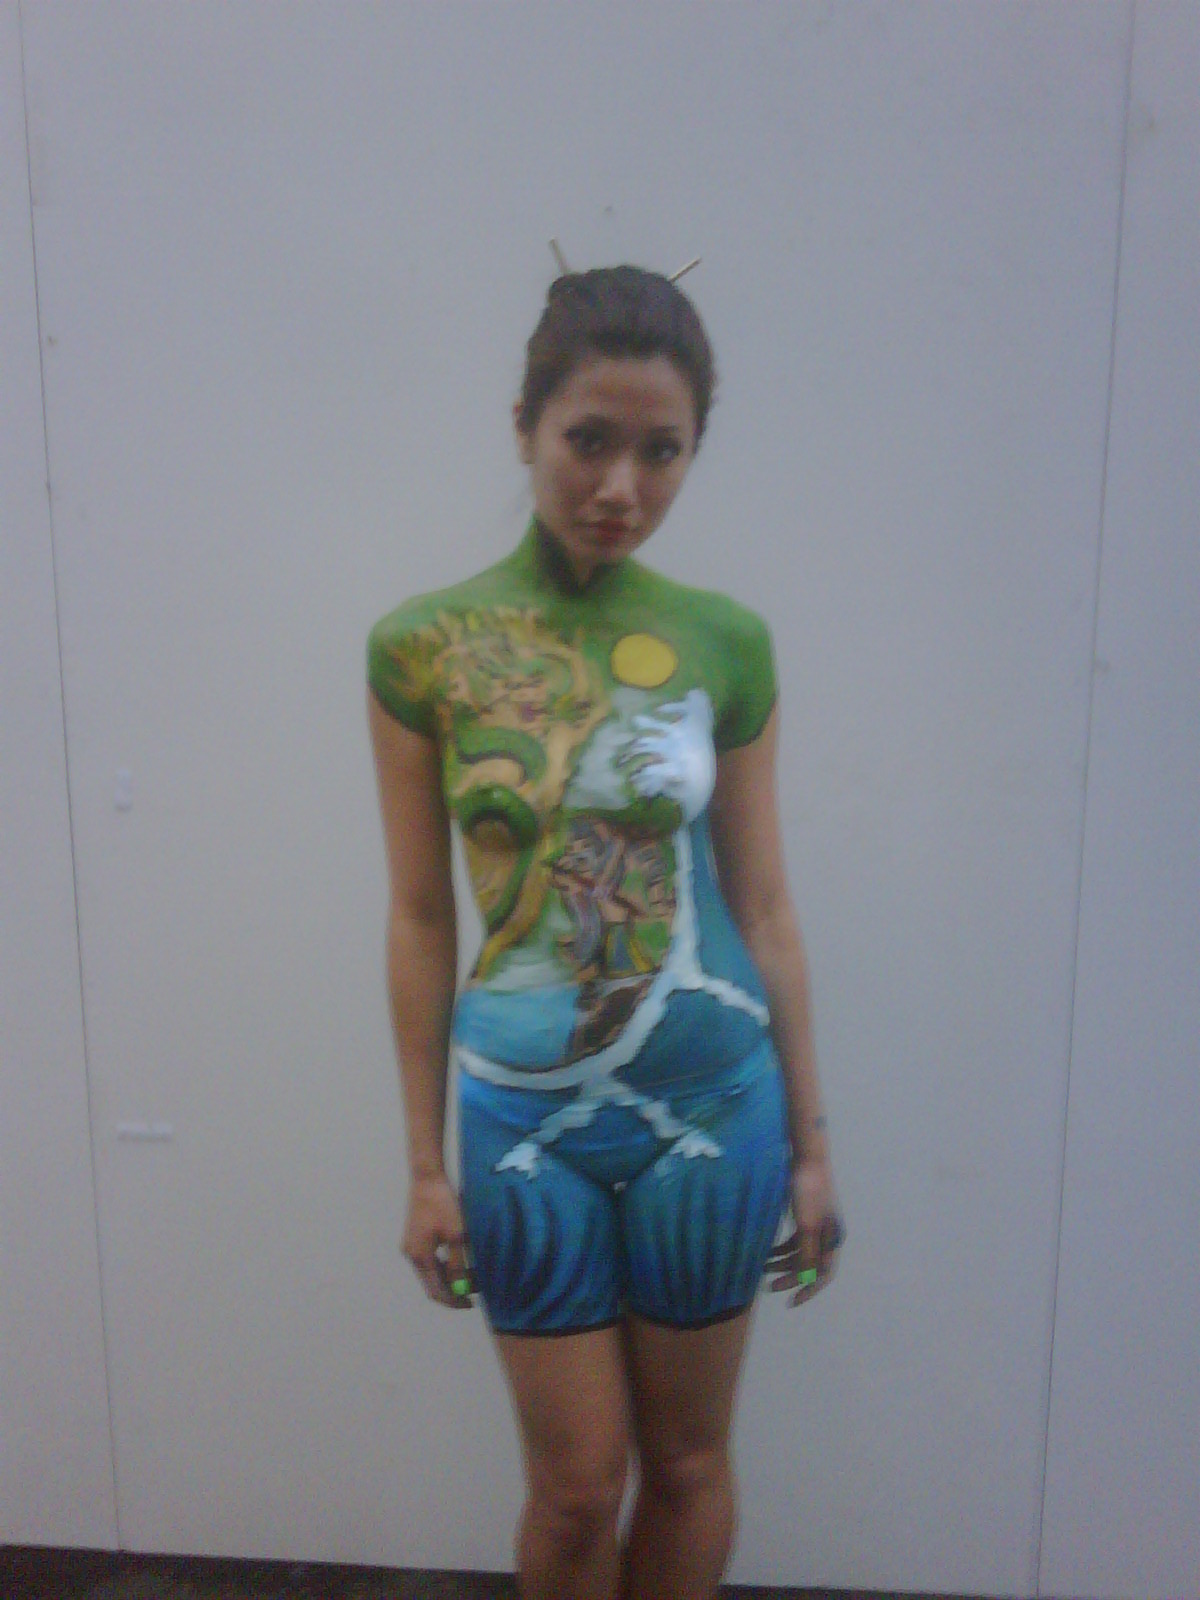 Asian body painting